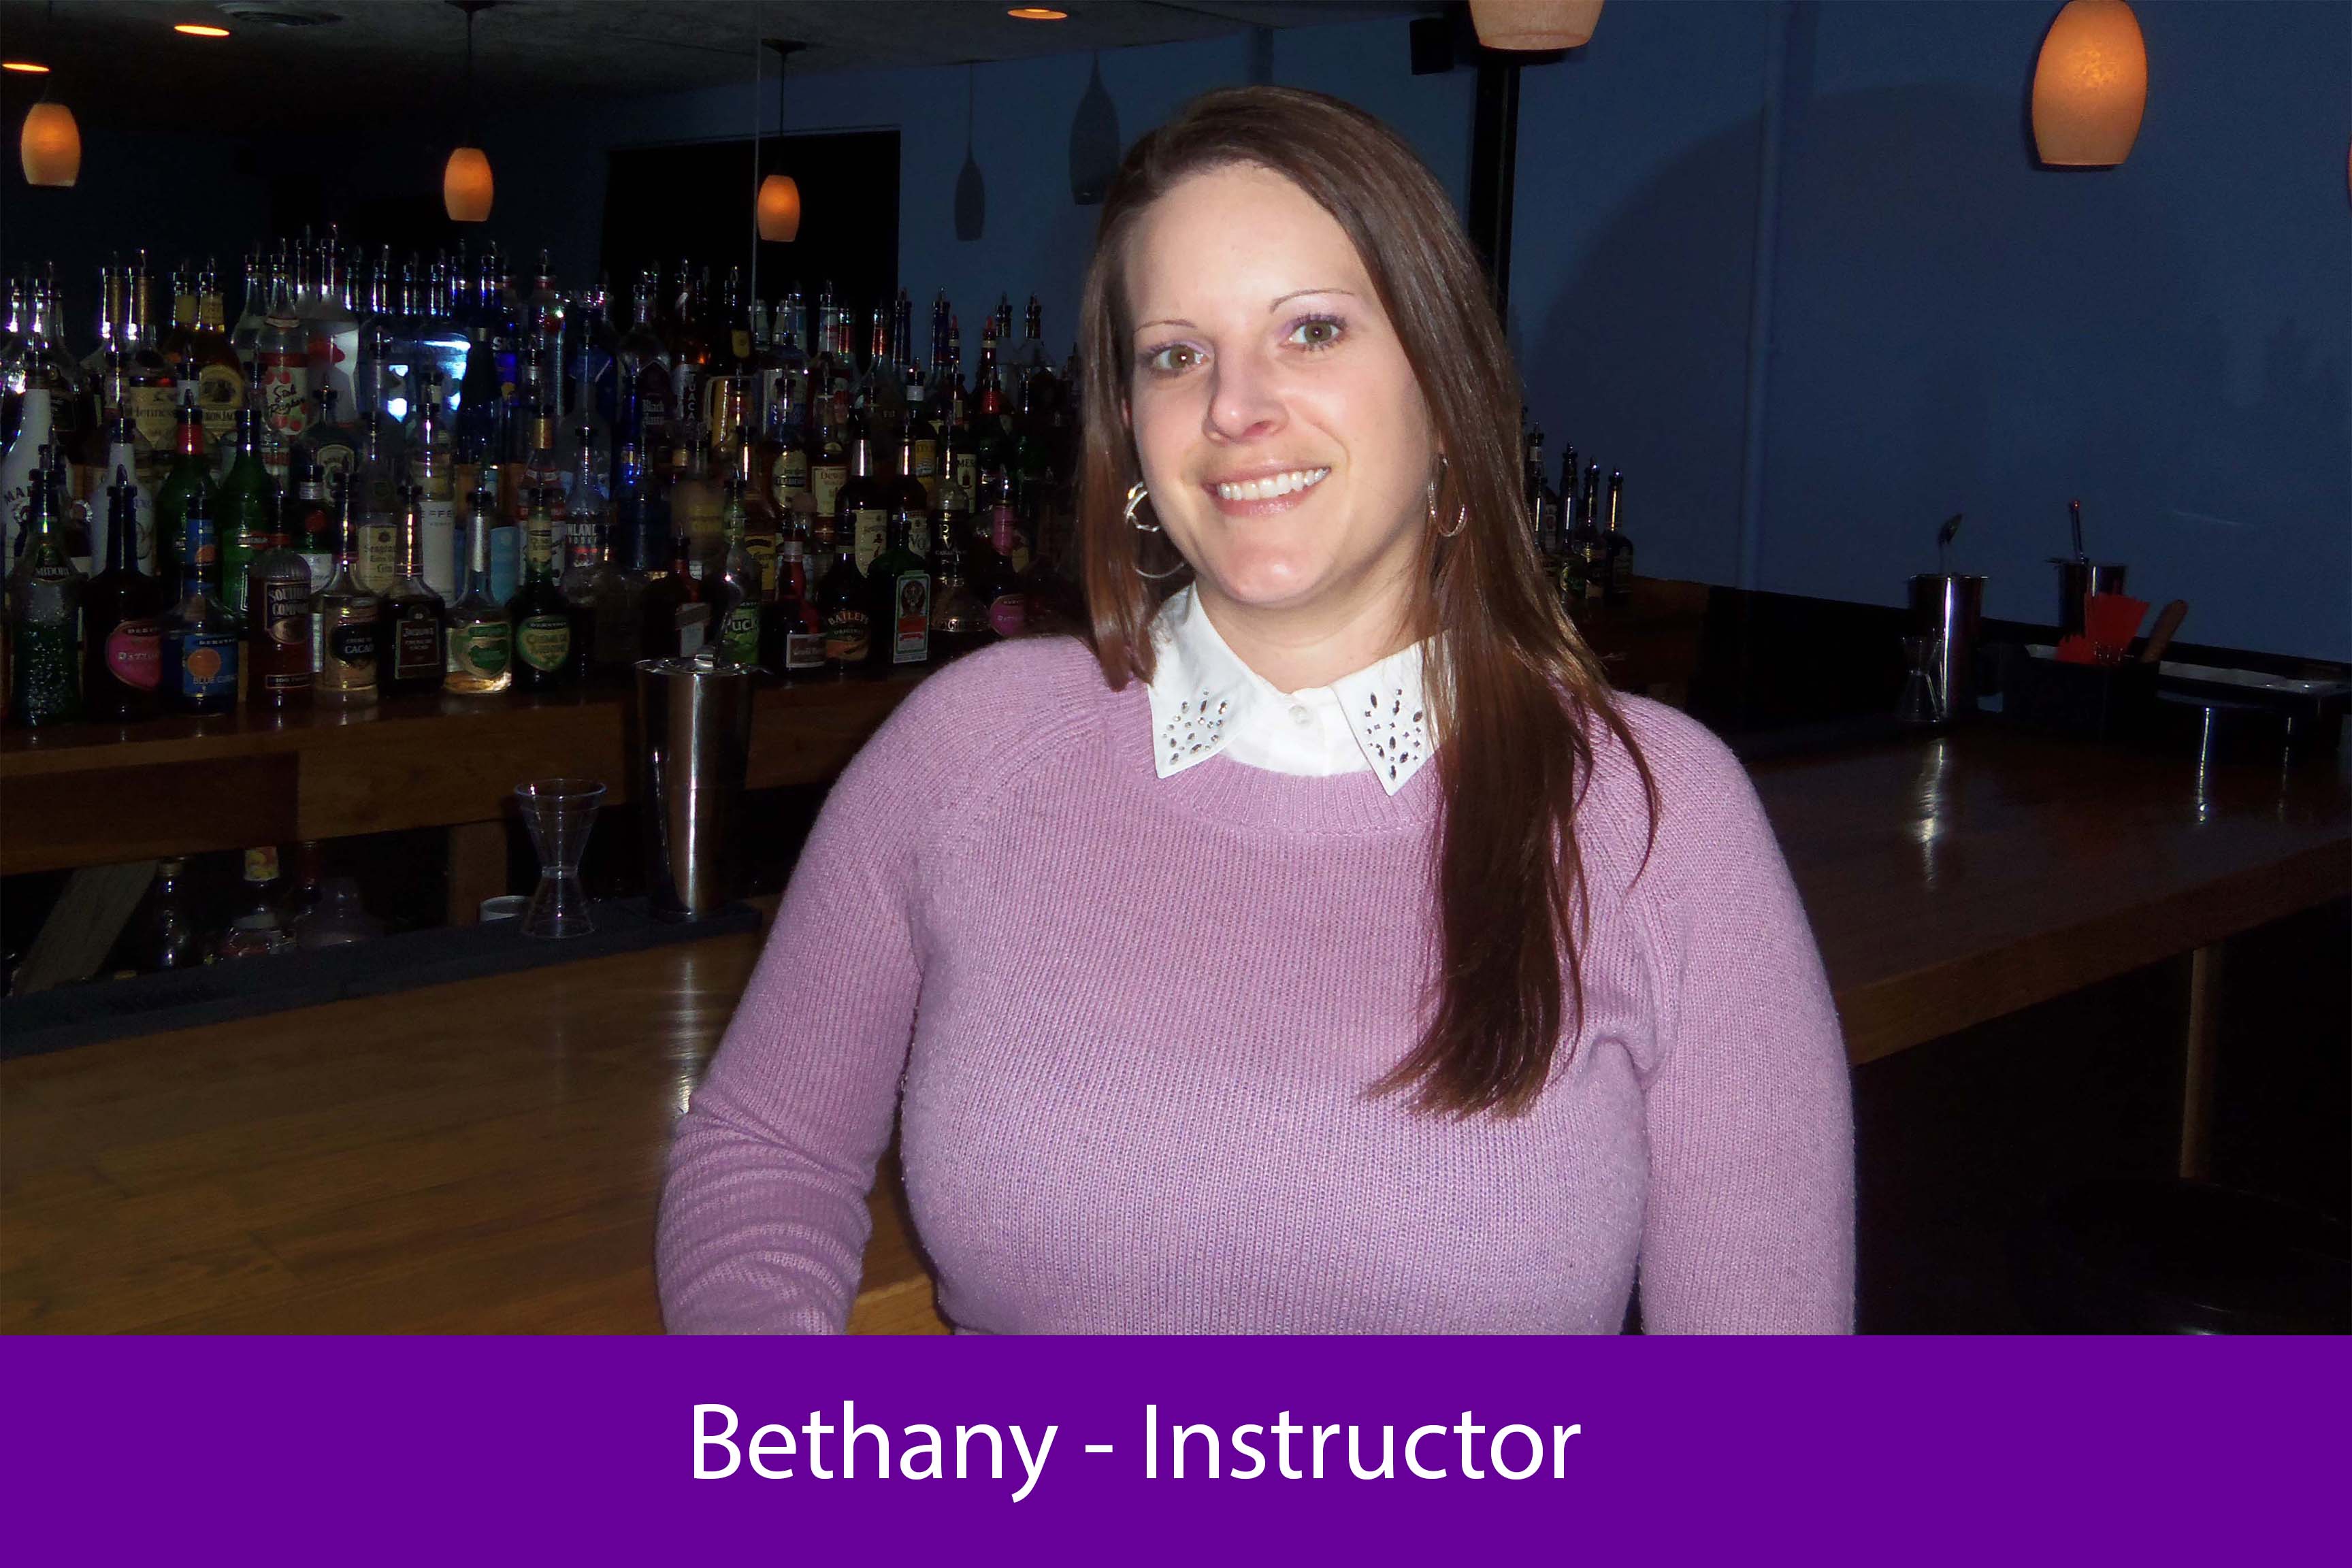 Meet Bethany our Columbus Bartending School Instructor